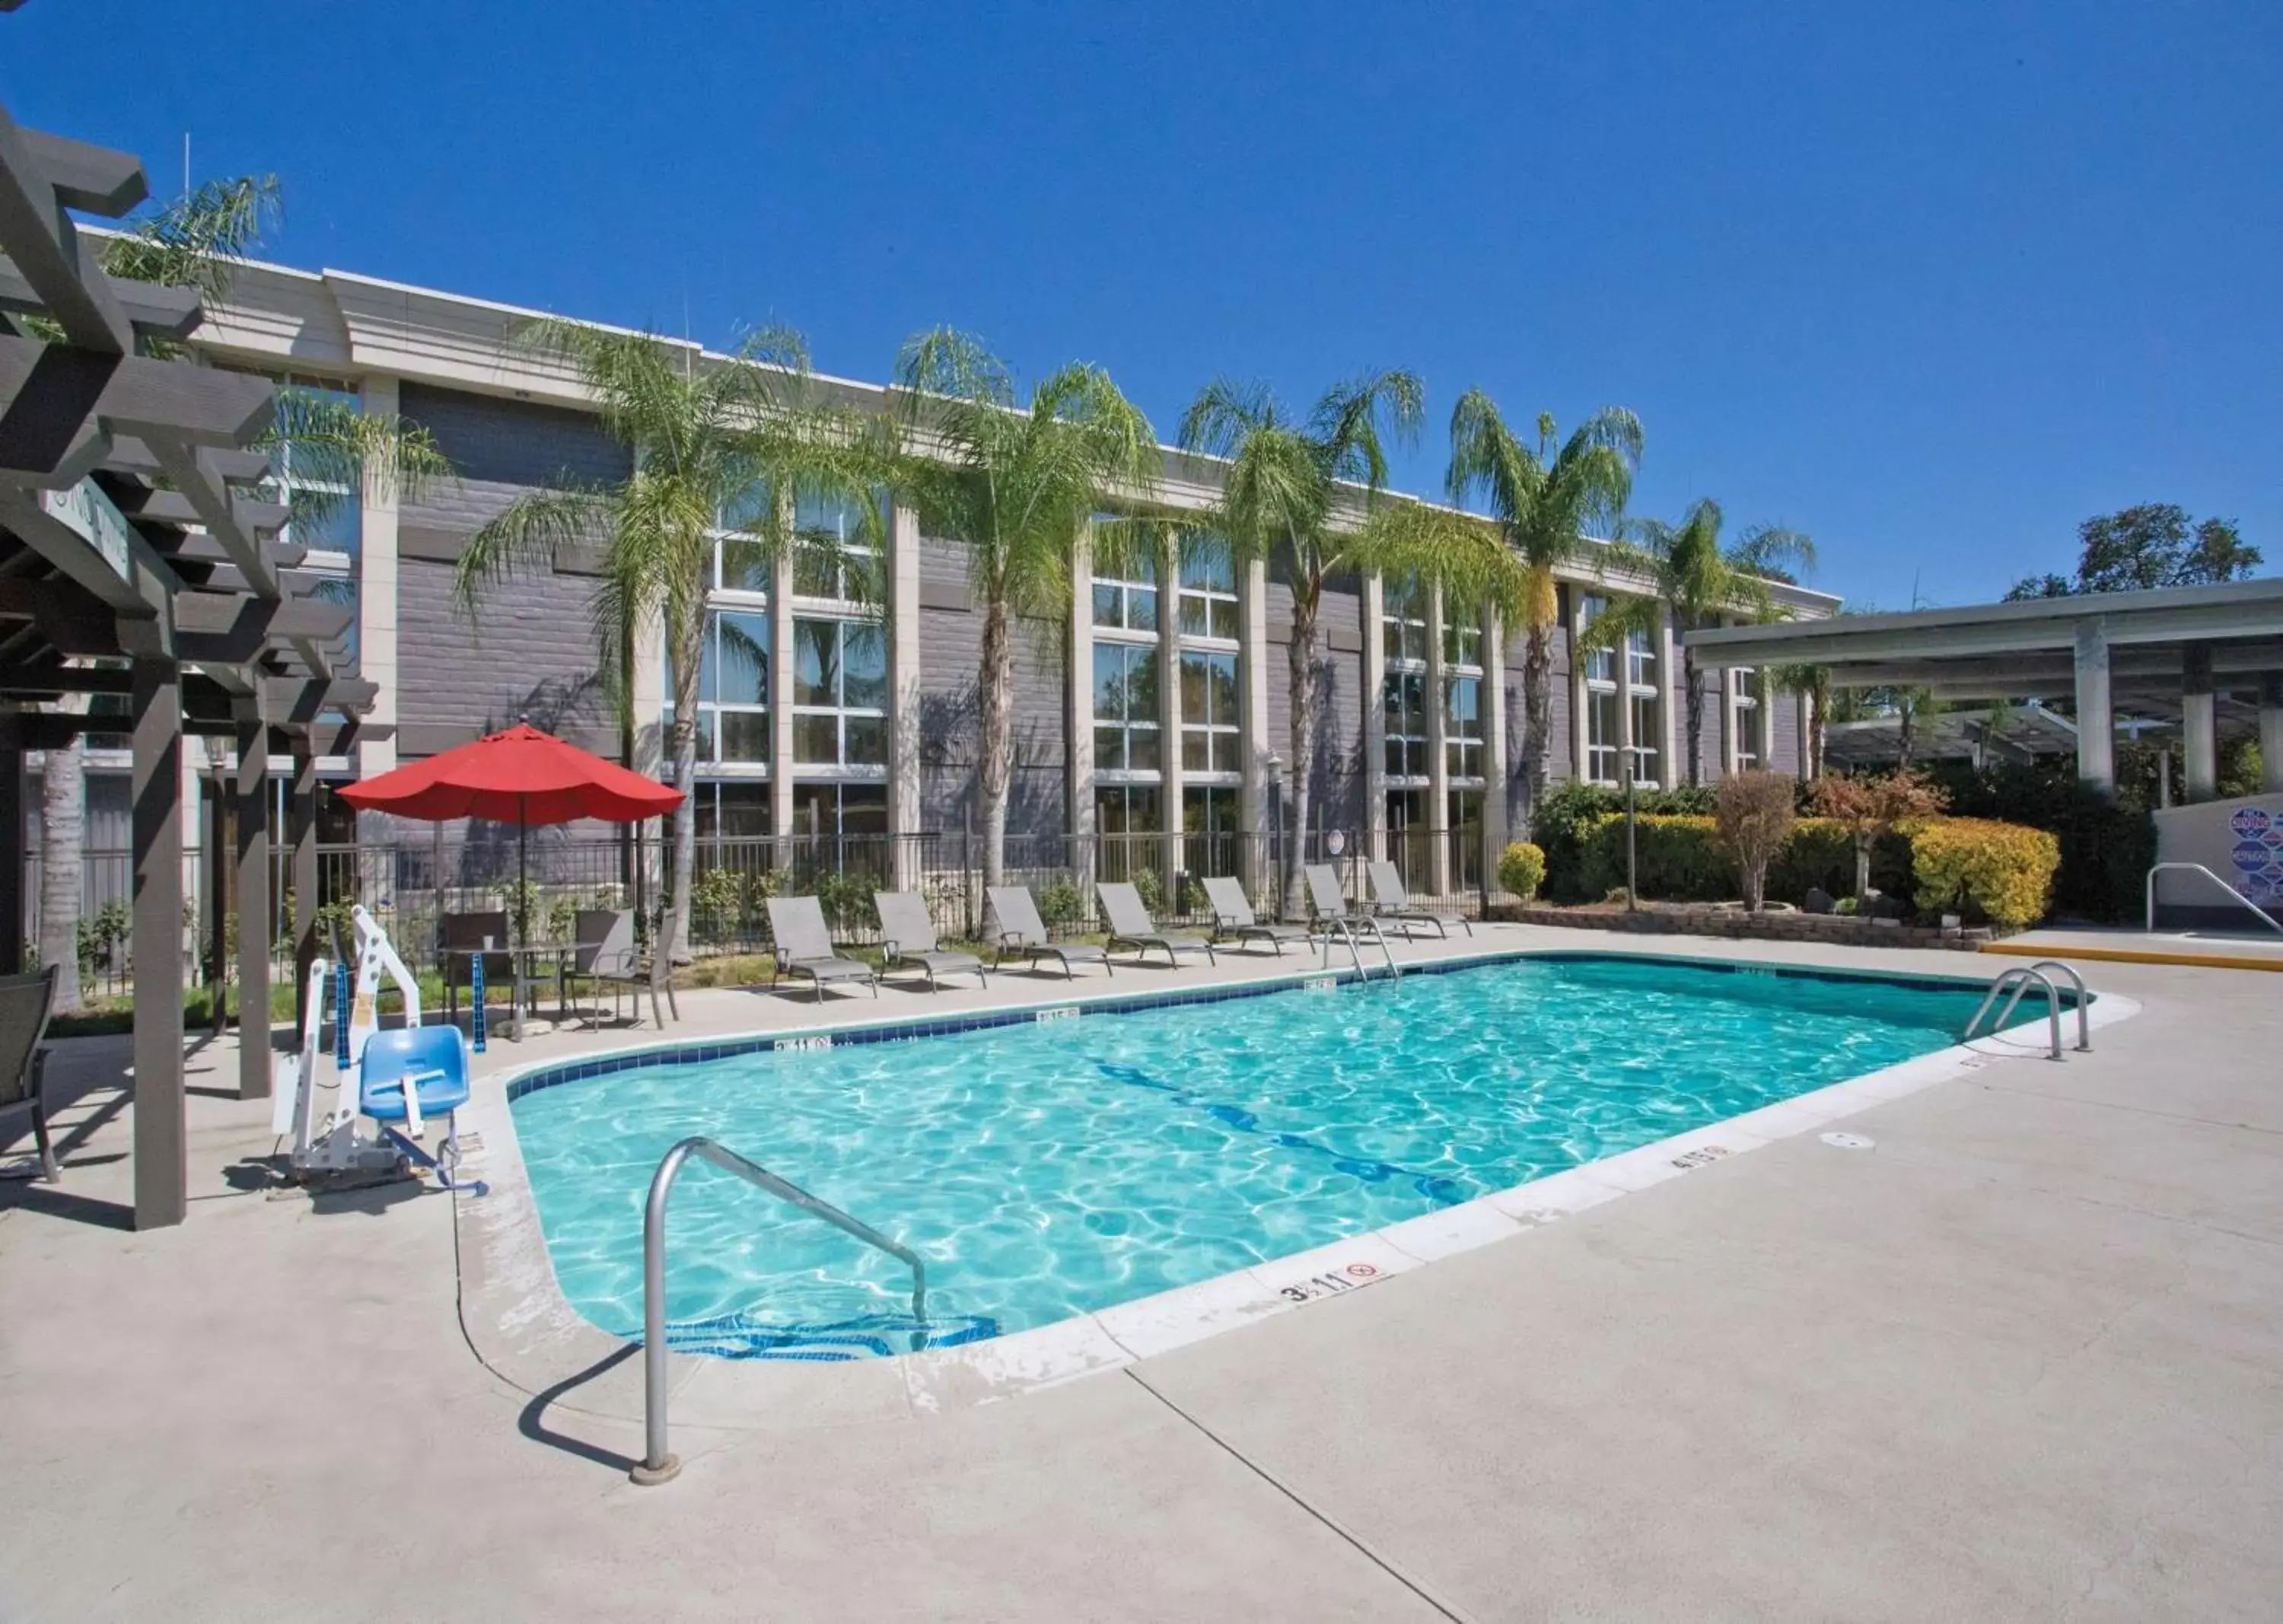 Pool view, Property Building in Doubletree By Hilton Chico, Ca